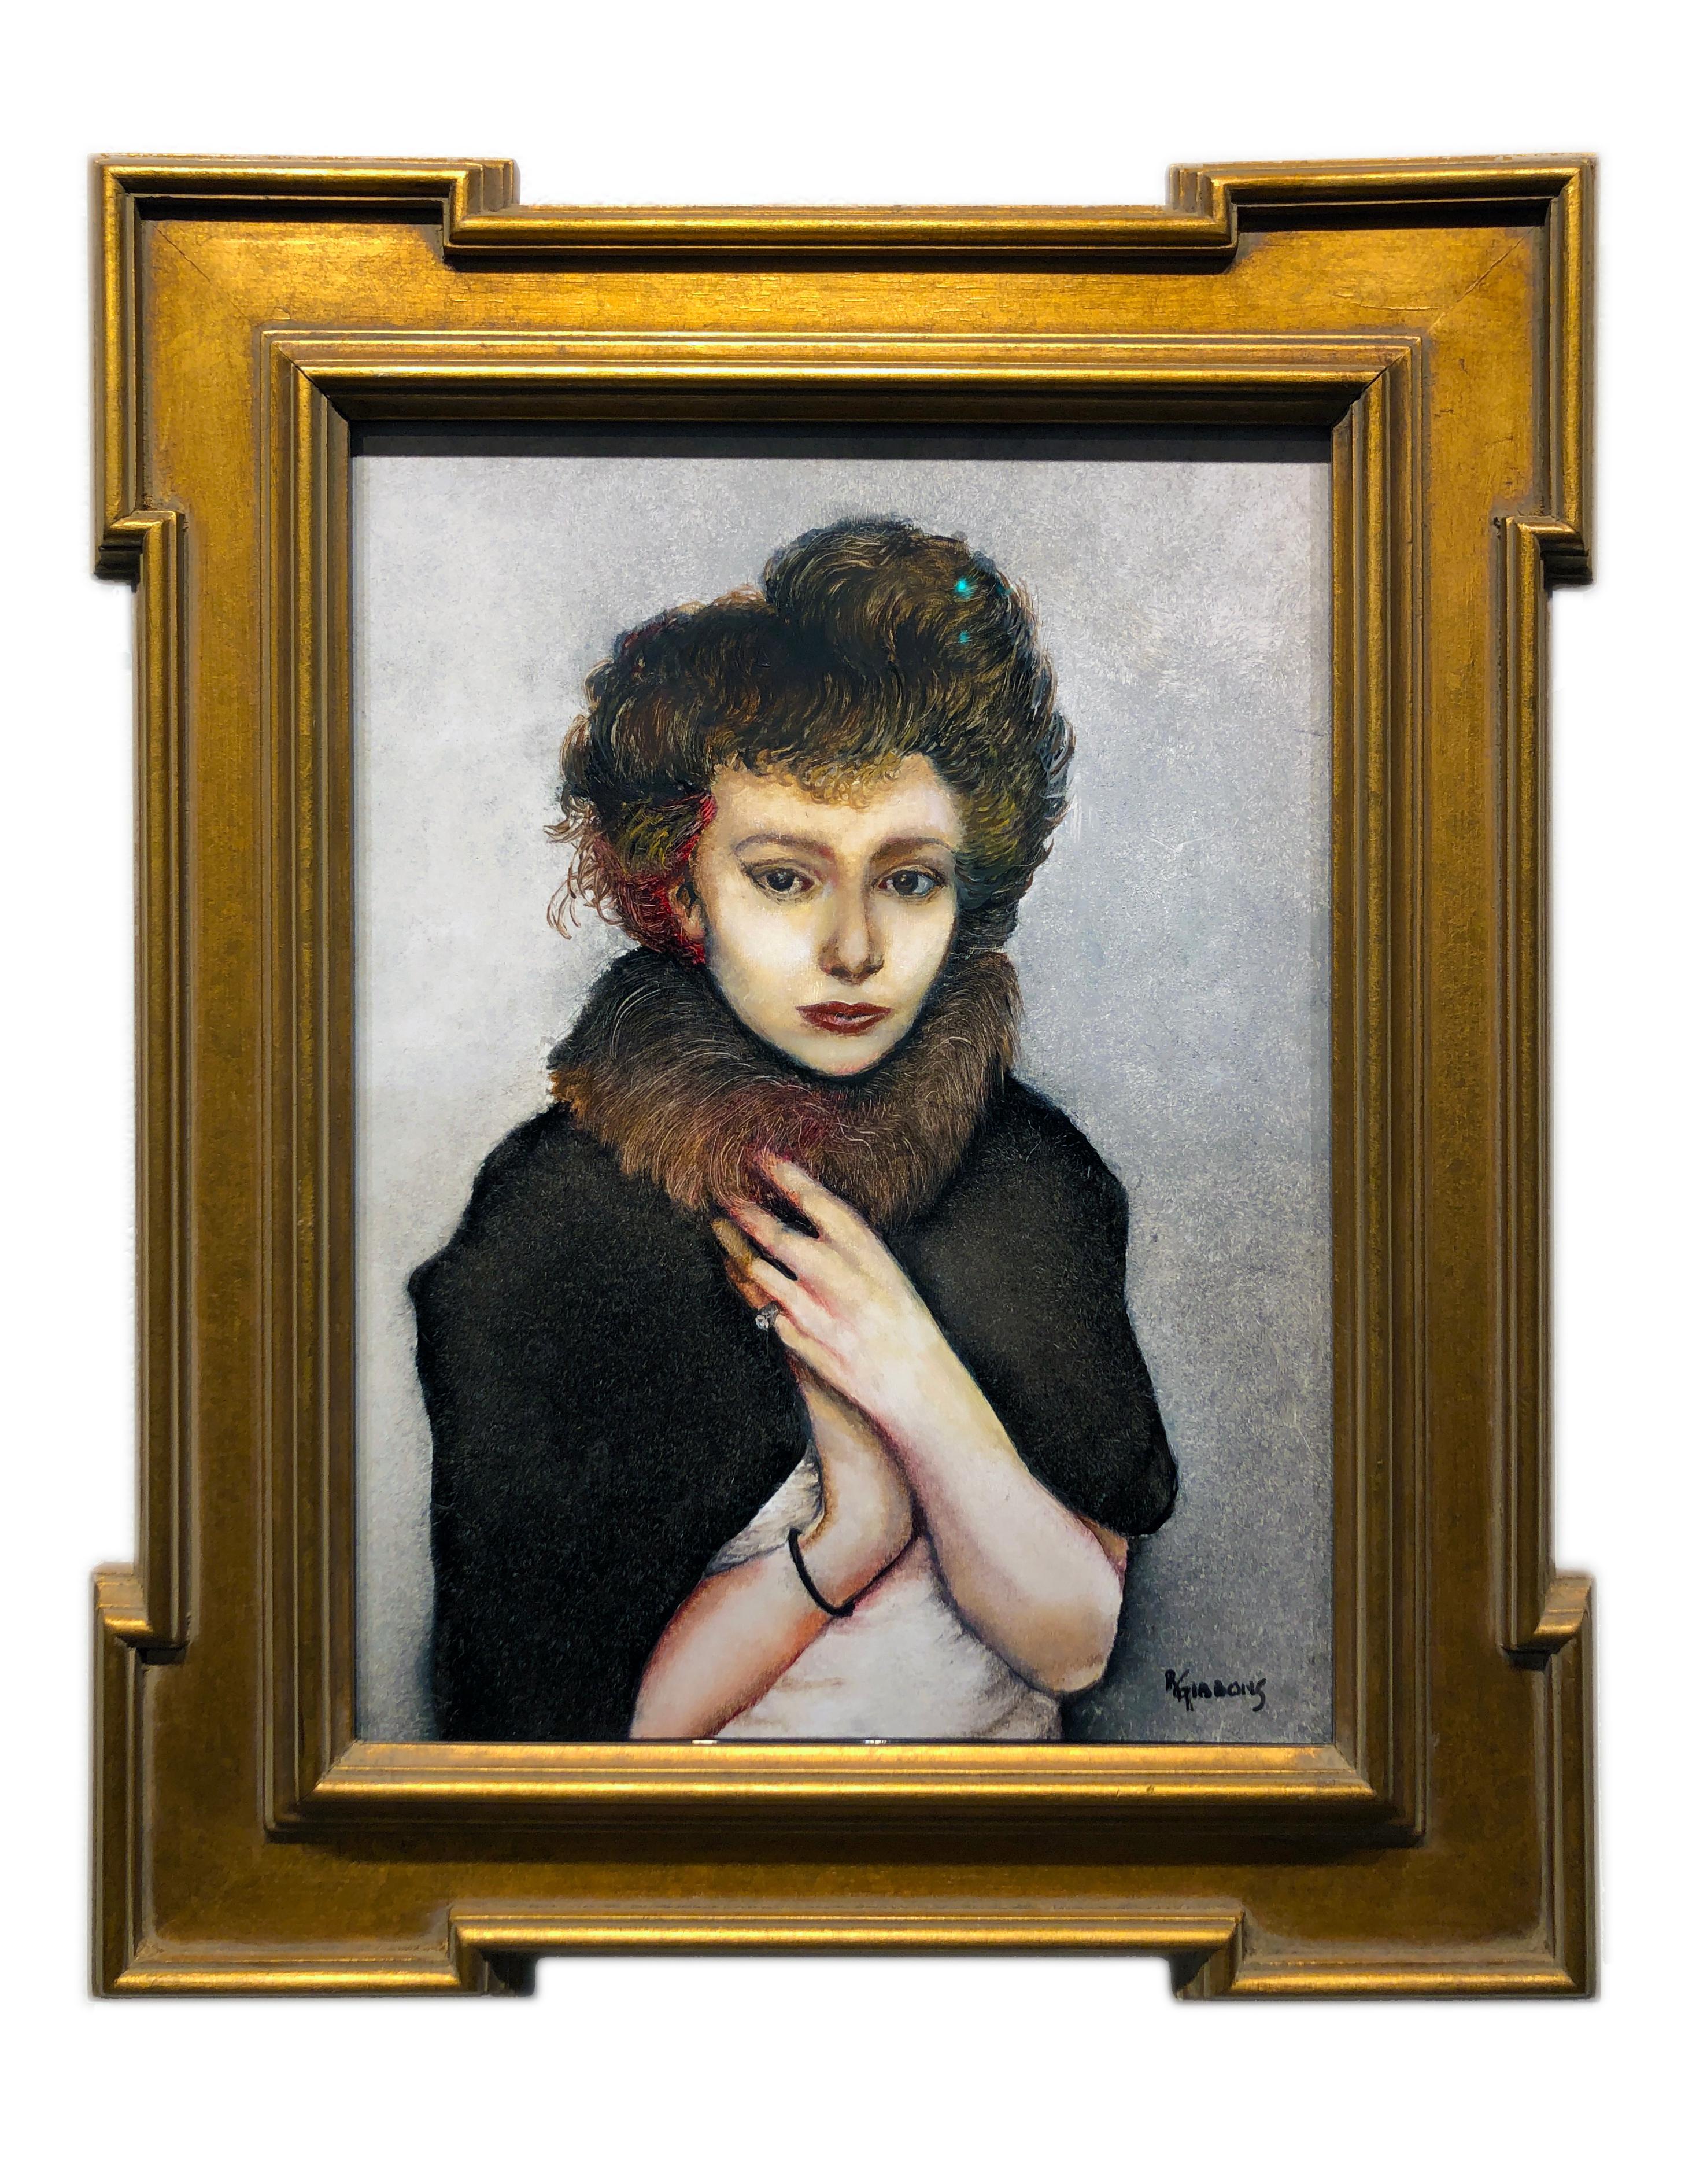 Remembering That Winter in Vienna, Portrait of a Women in Fur, Original Oil - Painting by Richard Gibbons